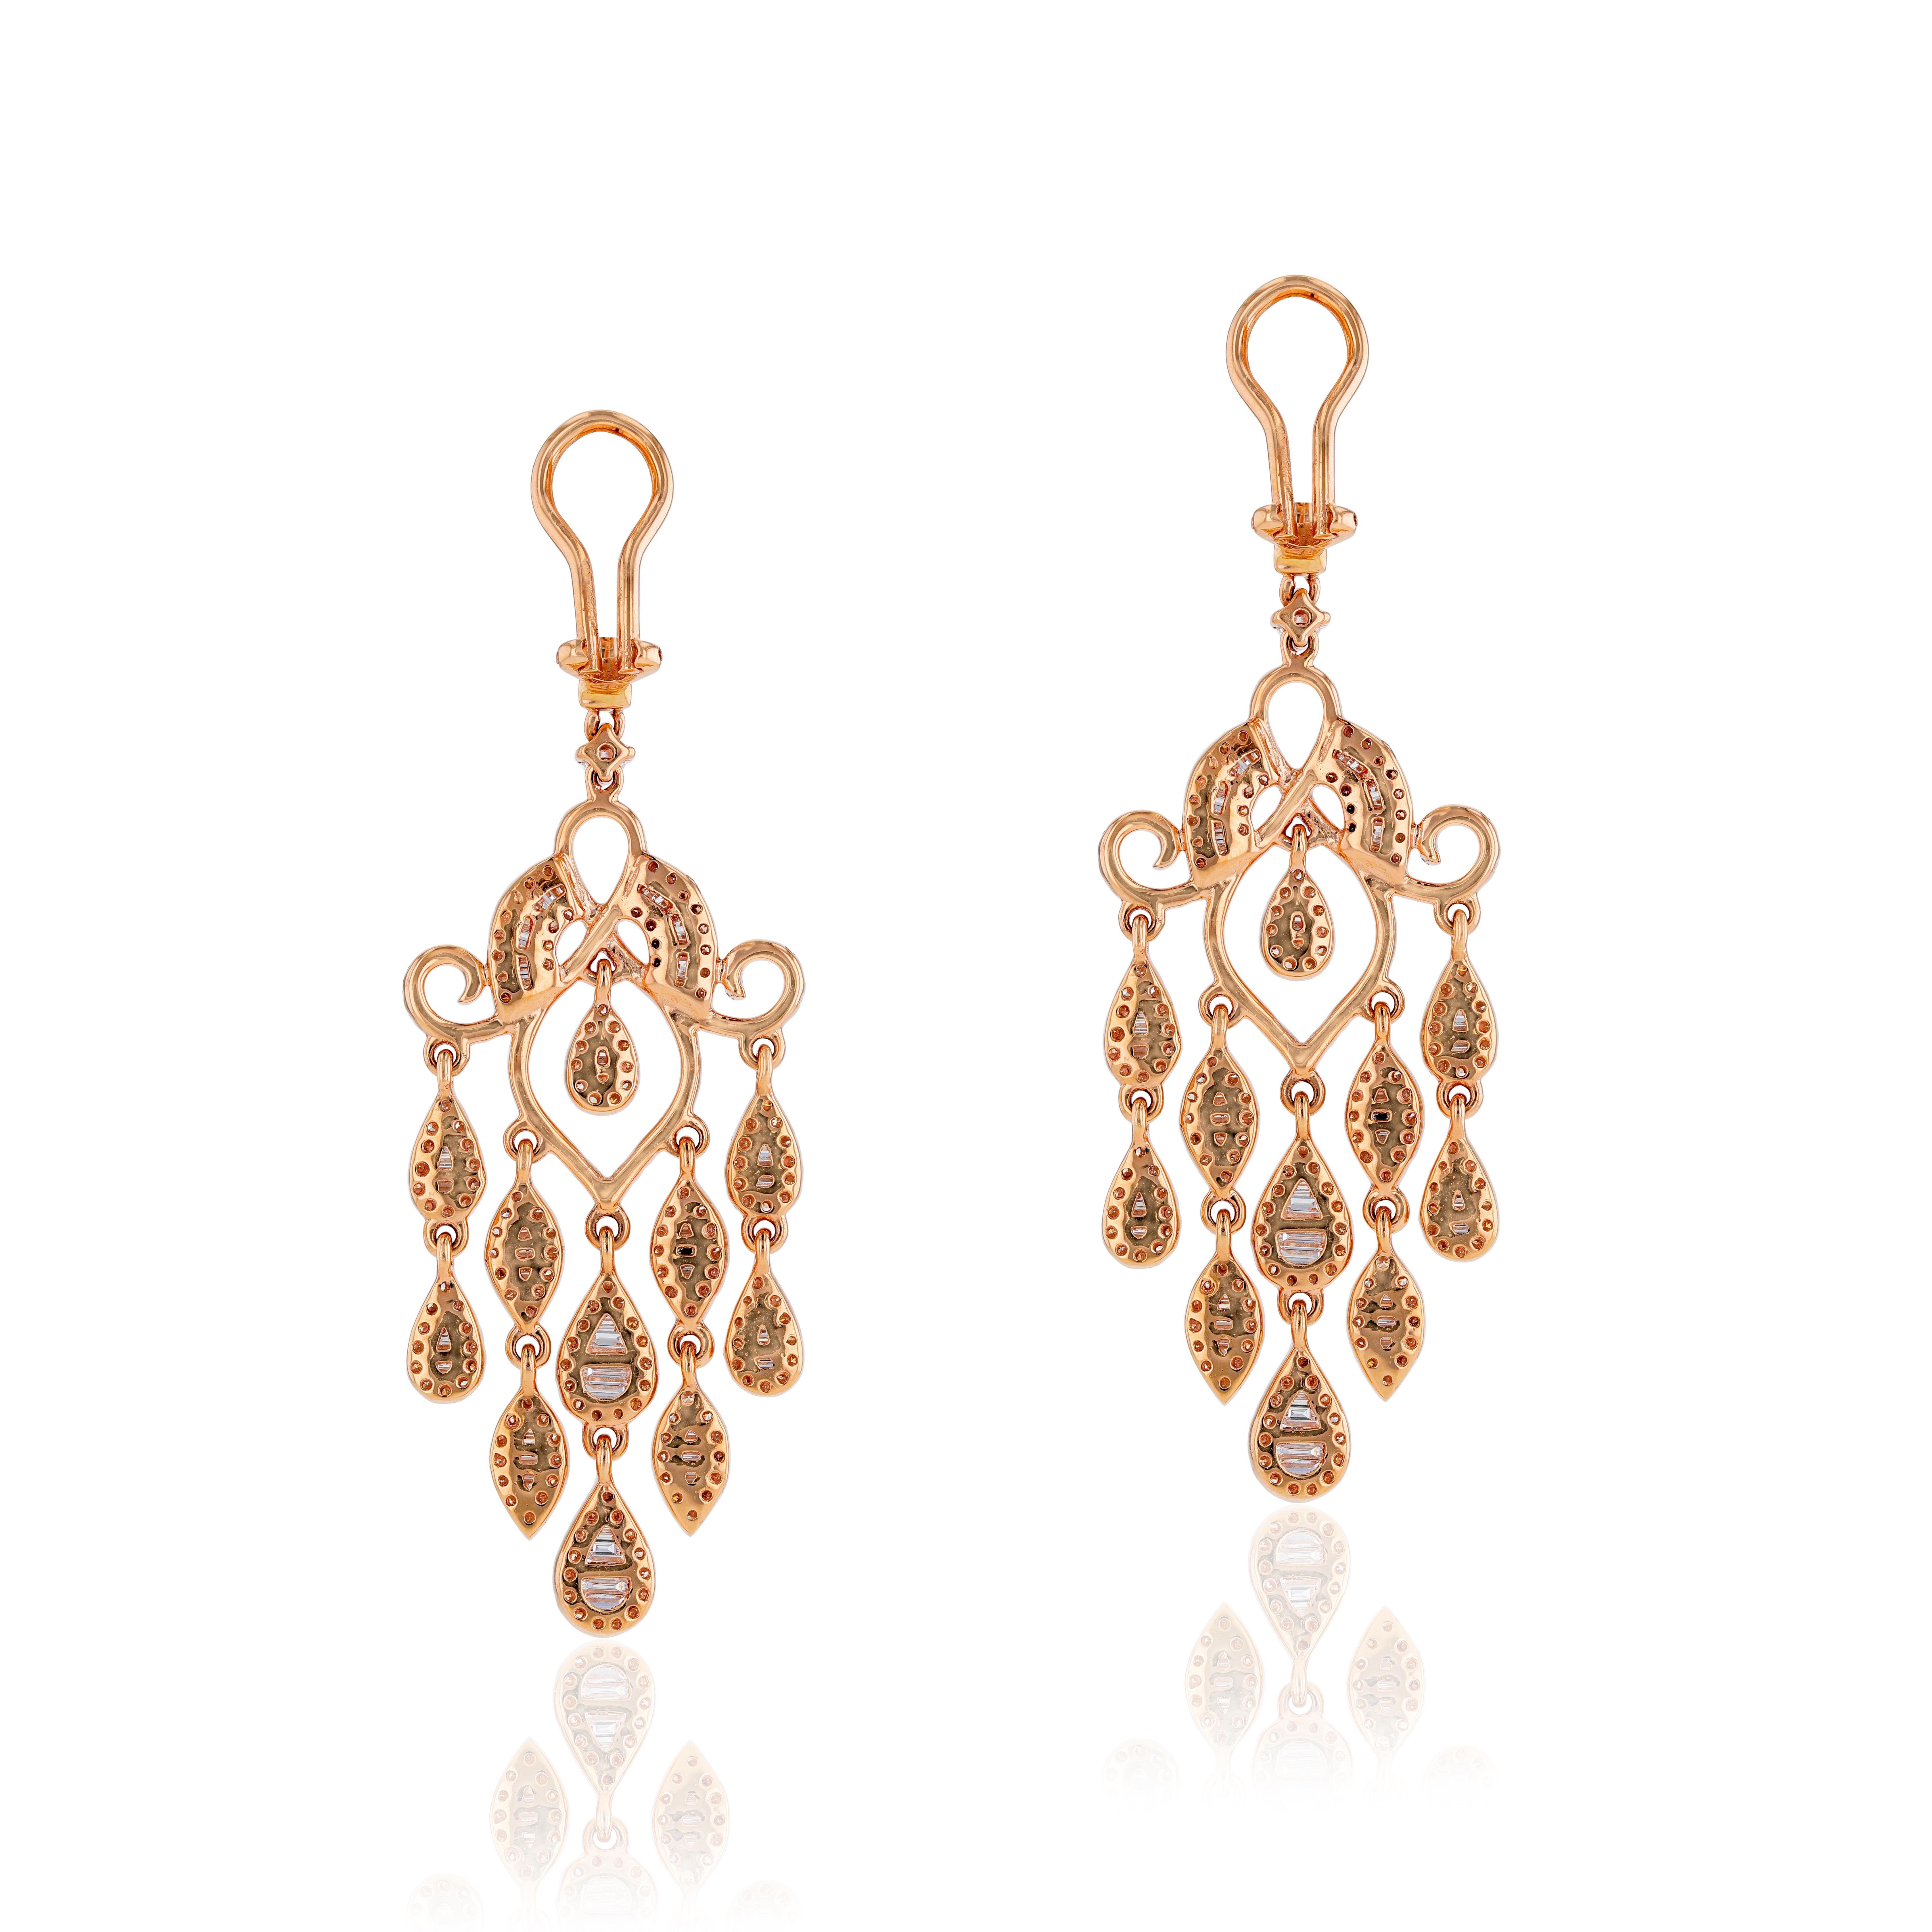 The sleek lines and striking color of 3.77 carats of white diamonds is showcased in these luxurious chandelier rose gold earrings by Amwaj Jewelry. Suspended from each piece, five articulated rows of round and baguette cut white diamonds. 
Diamonds